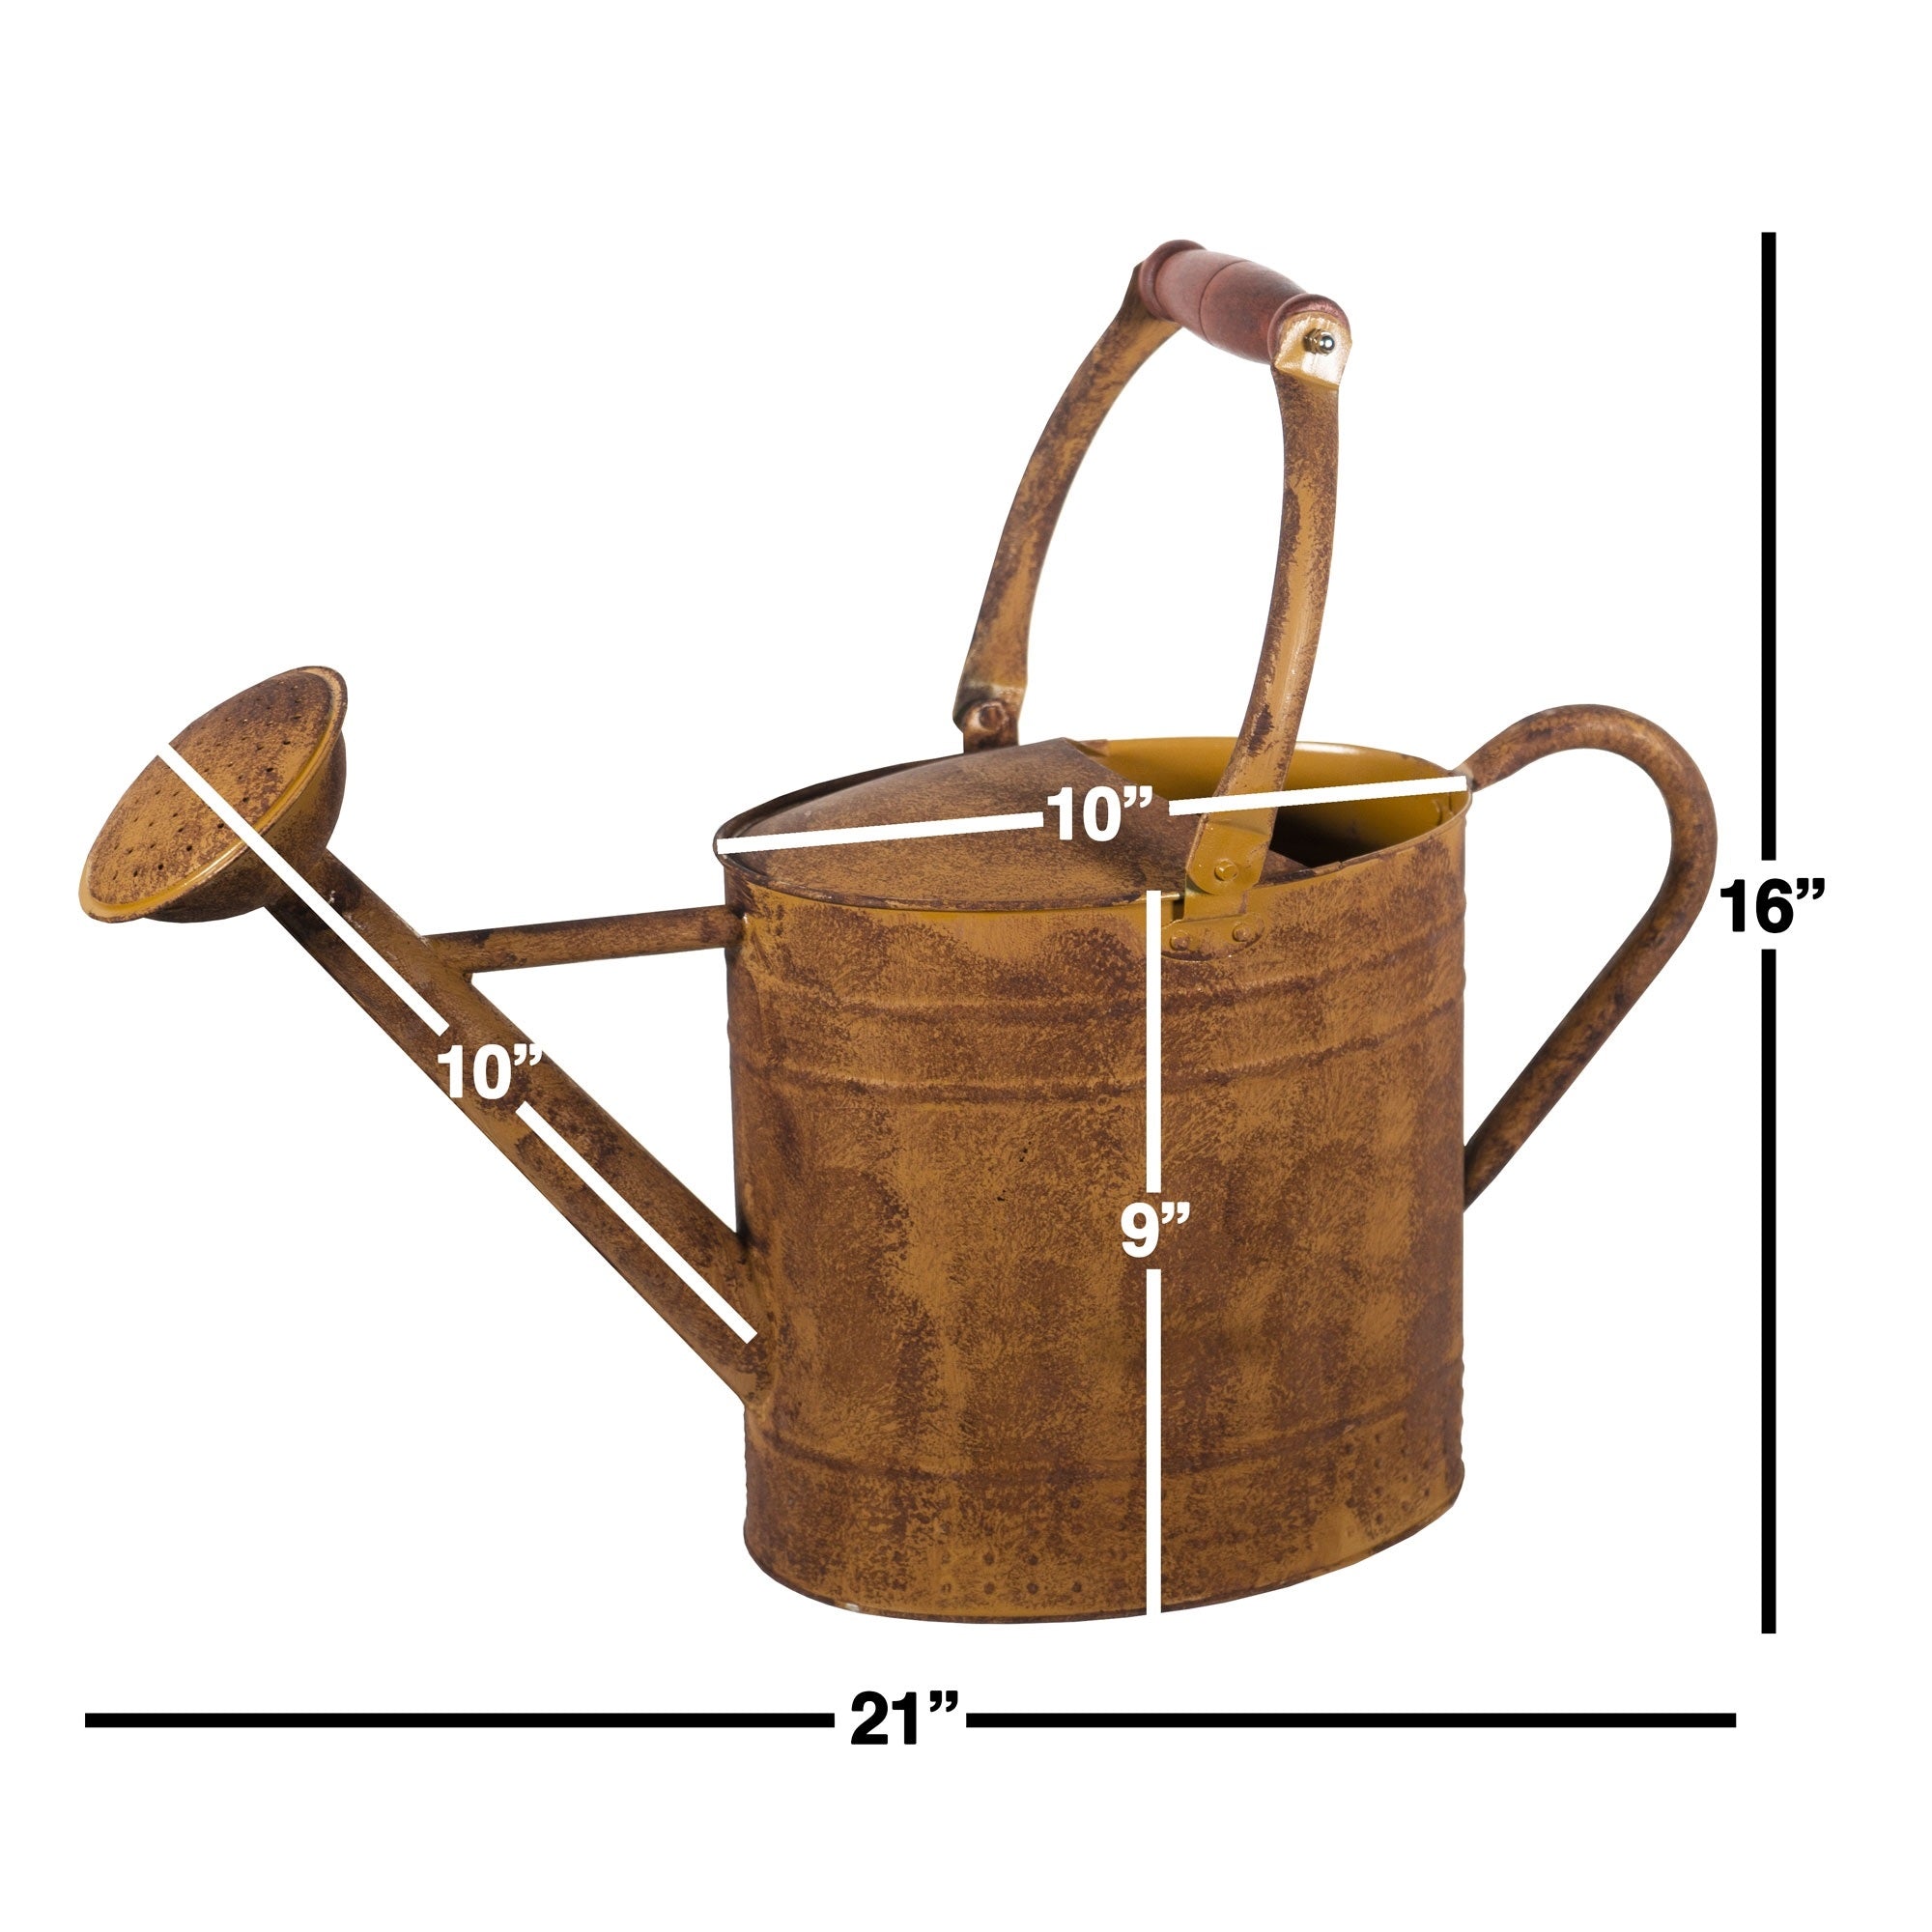 Gardener Select Farmhouse Collection Watering Can, Rusty (1.85 gallons)